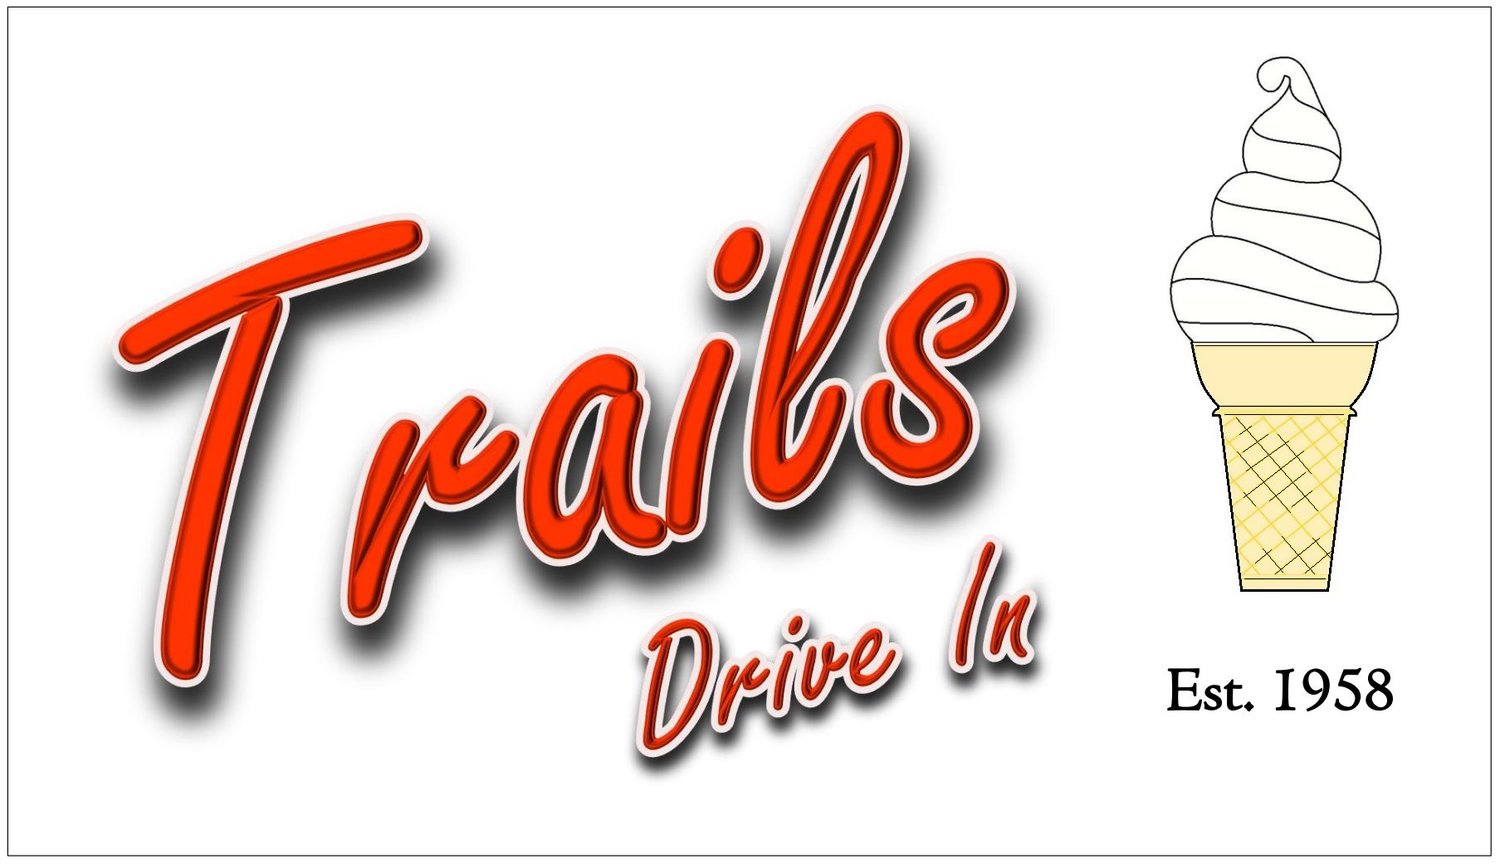 Trails Drive In